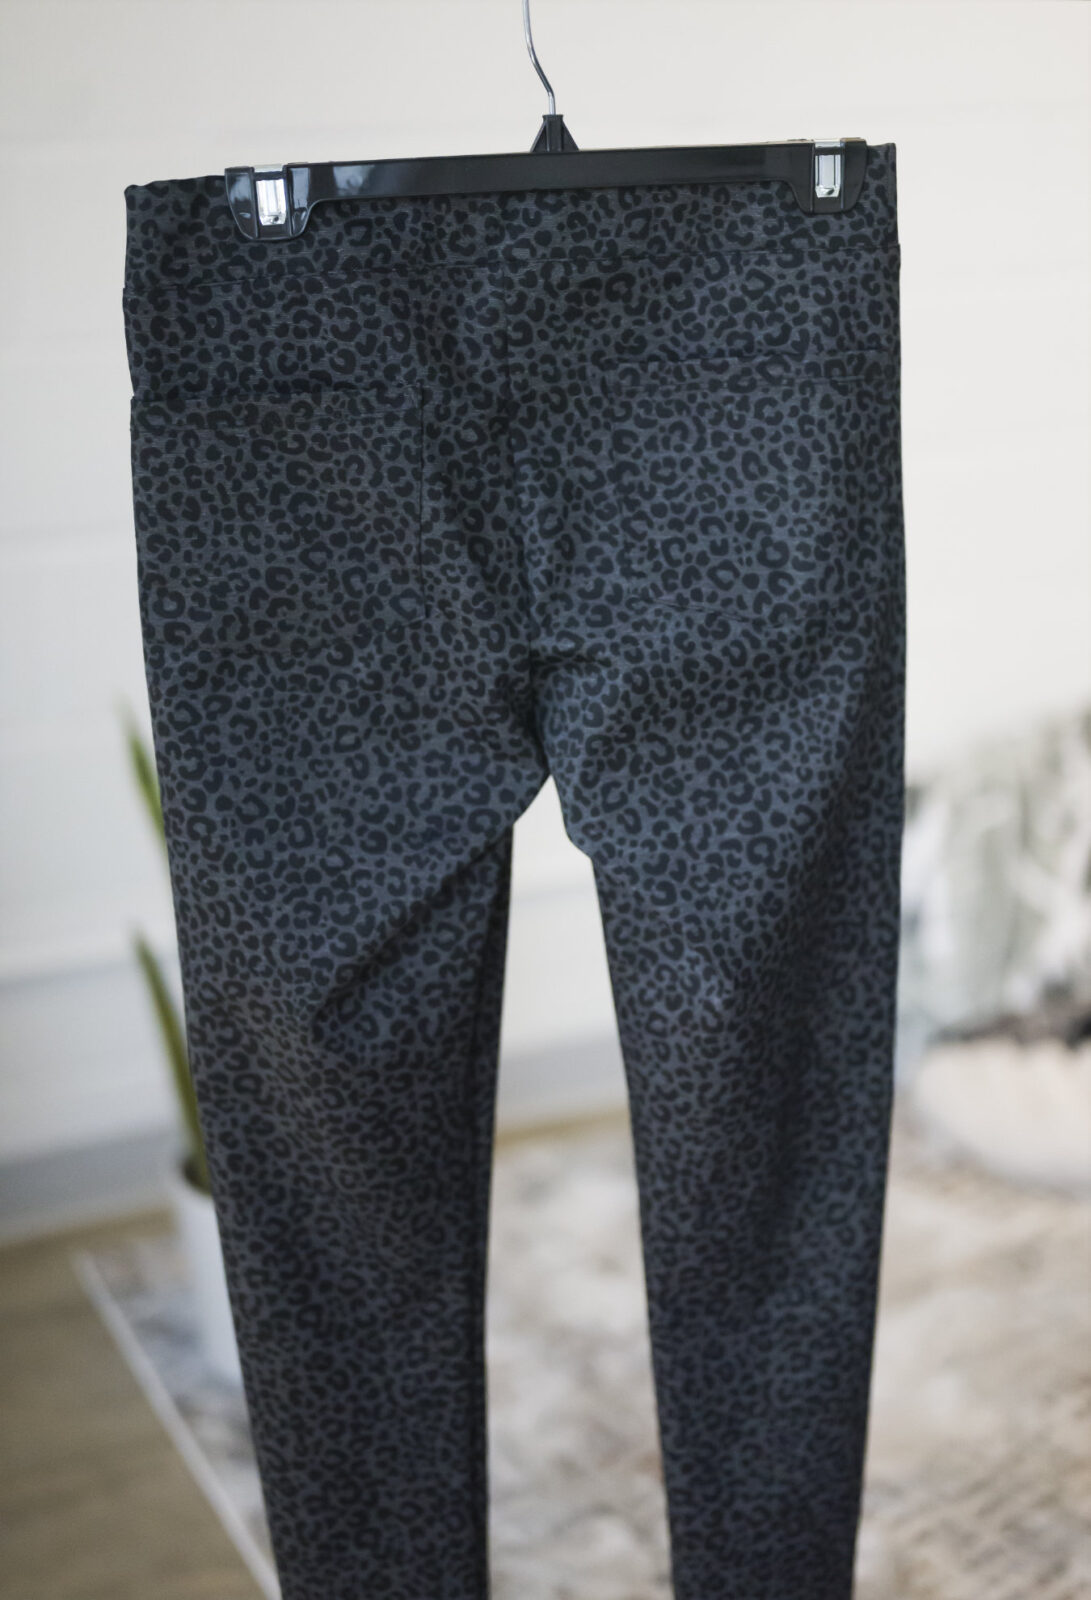 Delice Pants by Marie, Leopard, pull-on, slim fit, Ponte di Roma fabric, rear pockets, sizes XS to XL, made in Quebec